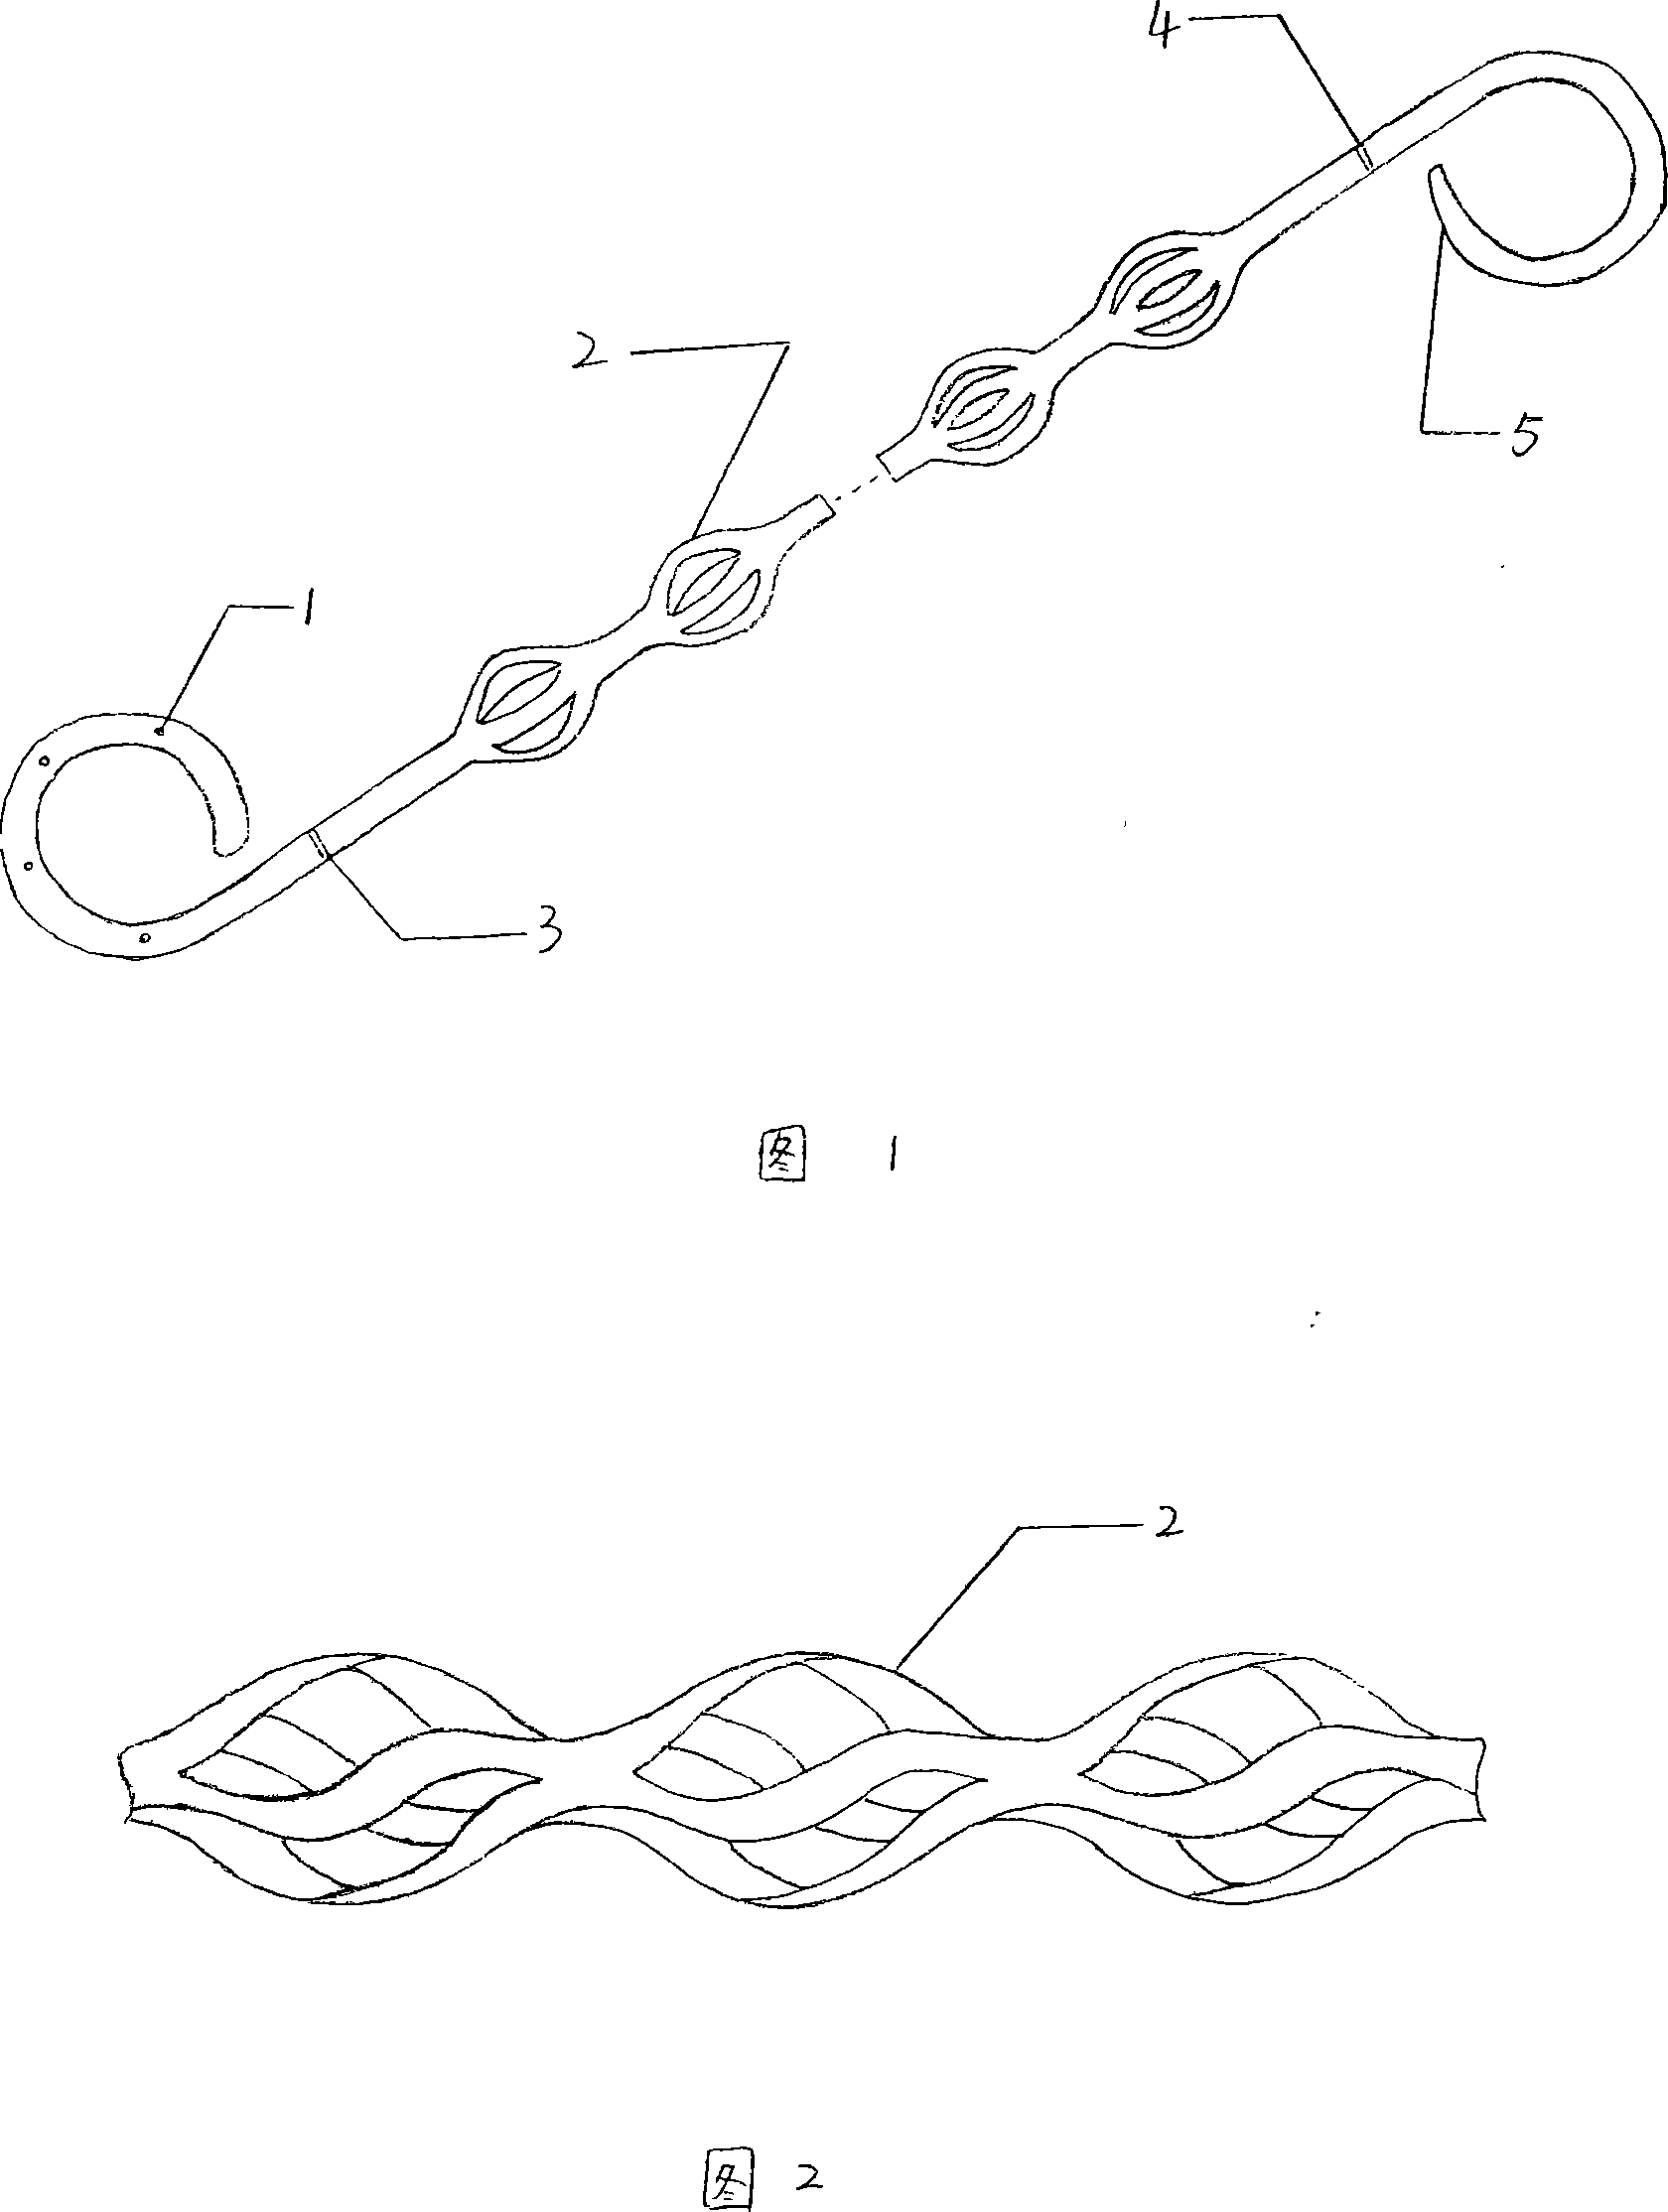 Urinary system stone taking device